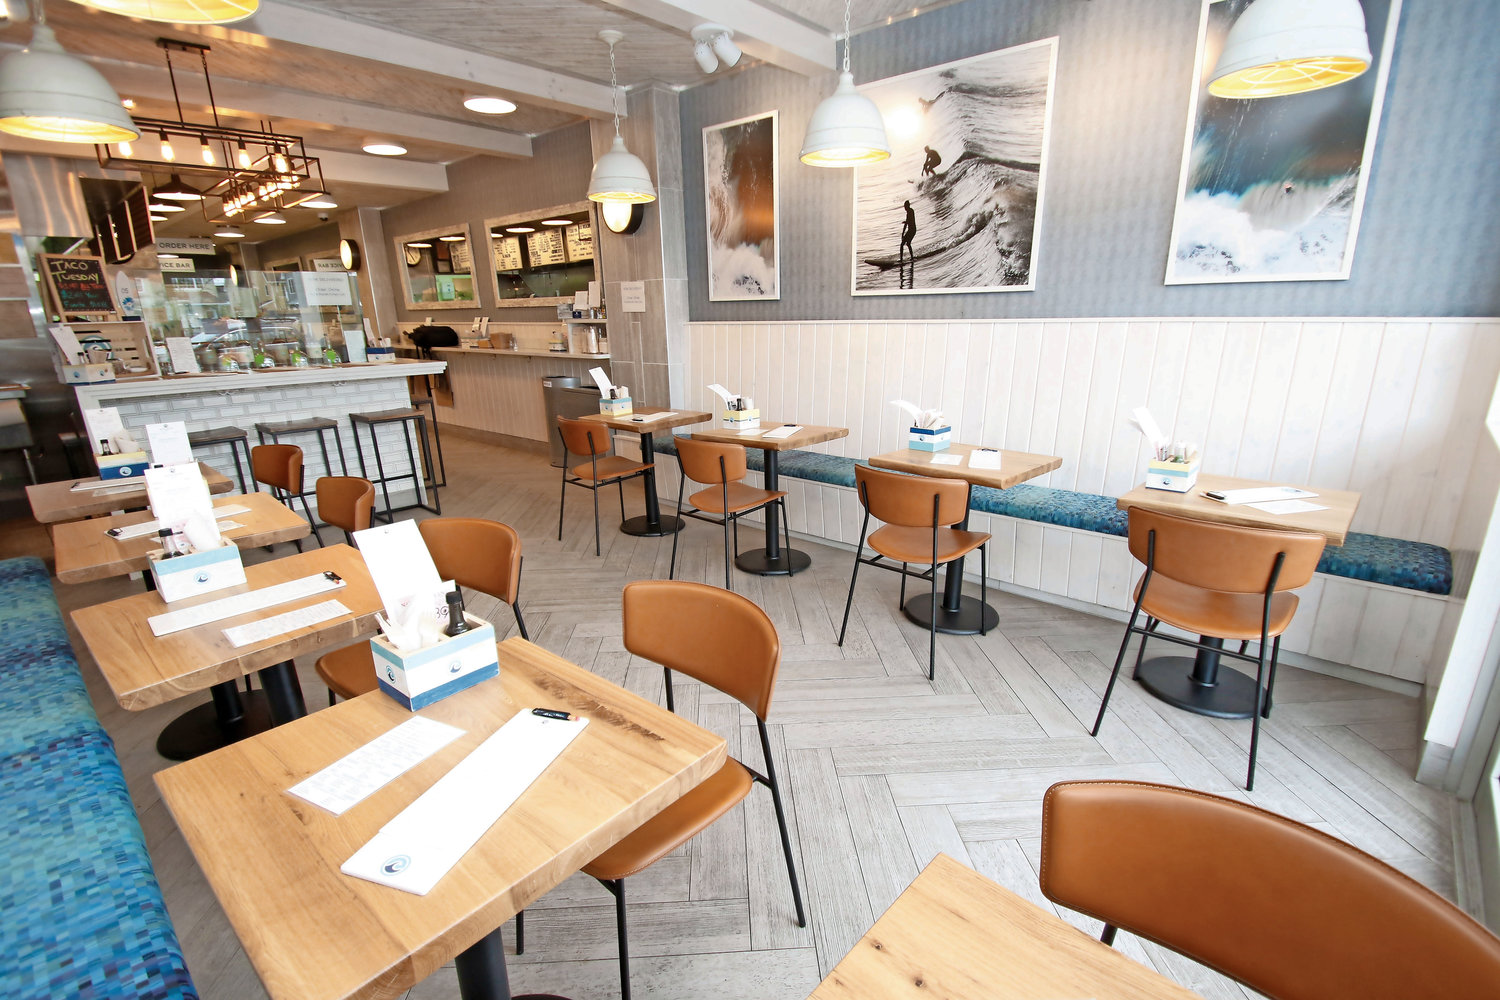 Pure Shore Kitchen opened at 655 E. Park Ave. last year.